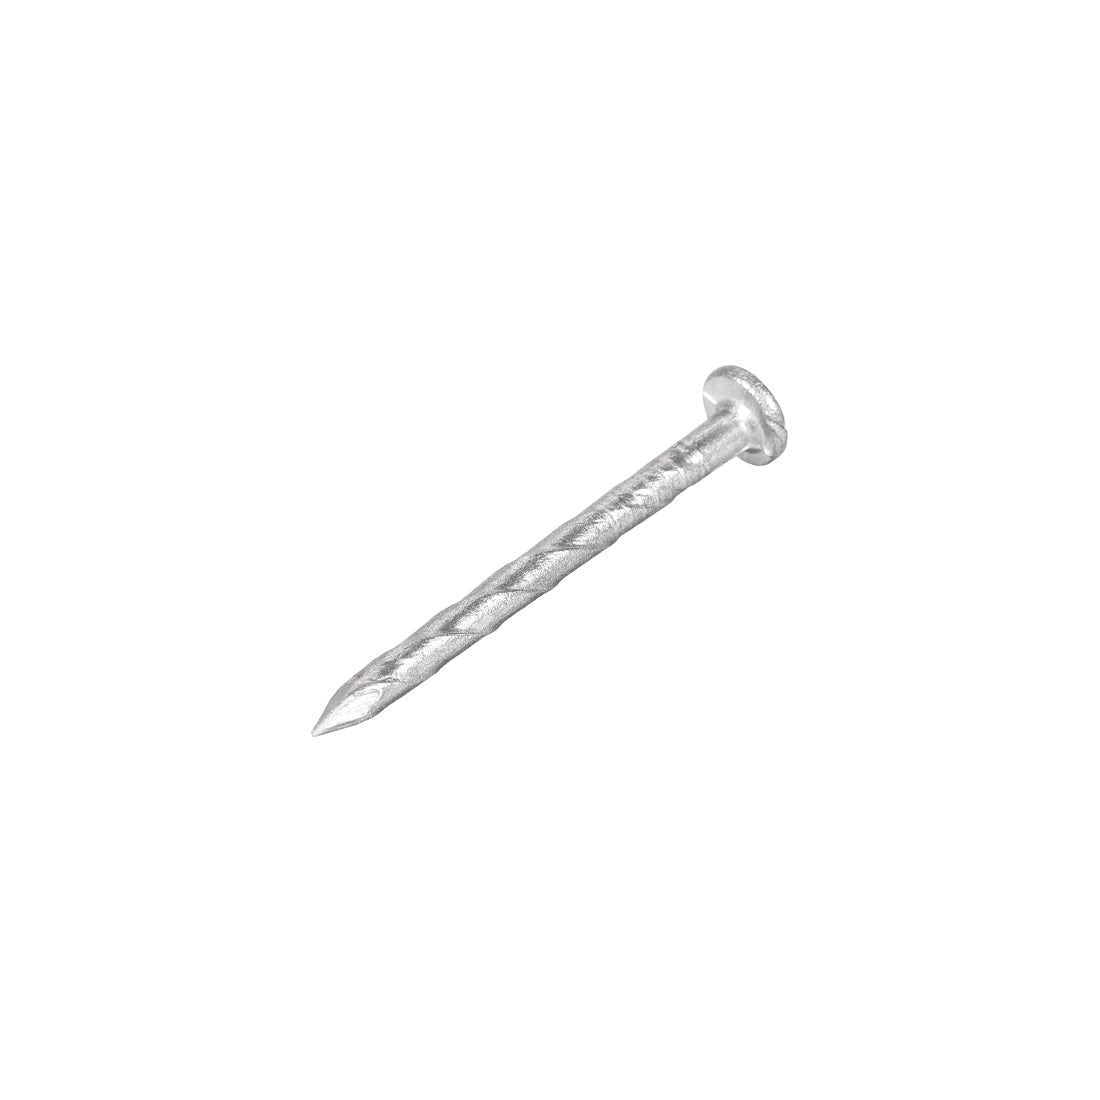 uxcell Uxcell Spiral Deck Nails Stainless Steel Nail Spiral Shank 27mmx2mm(LxD) , 100 Pcs